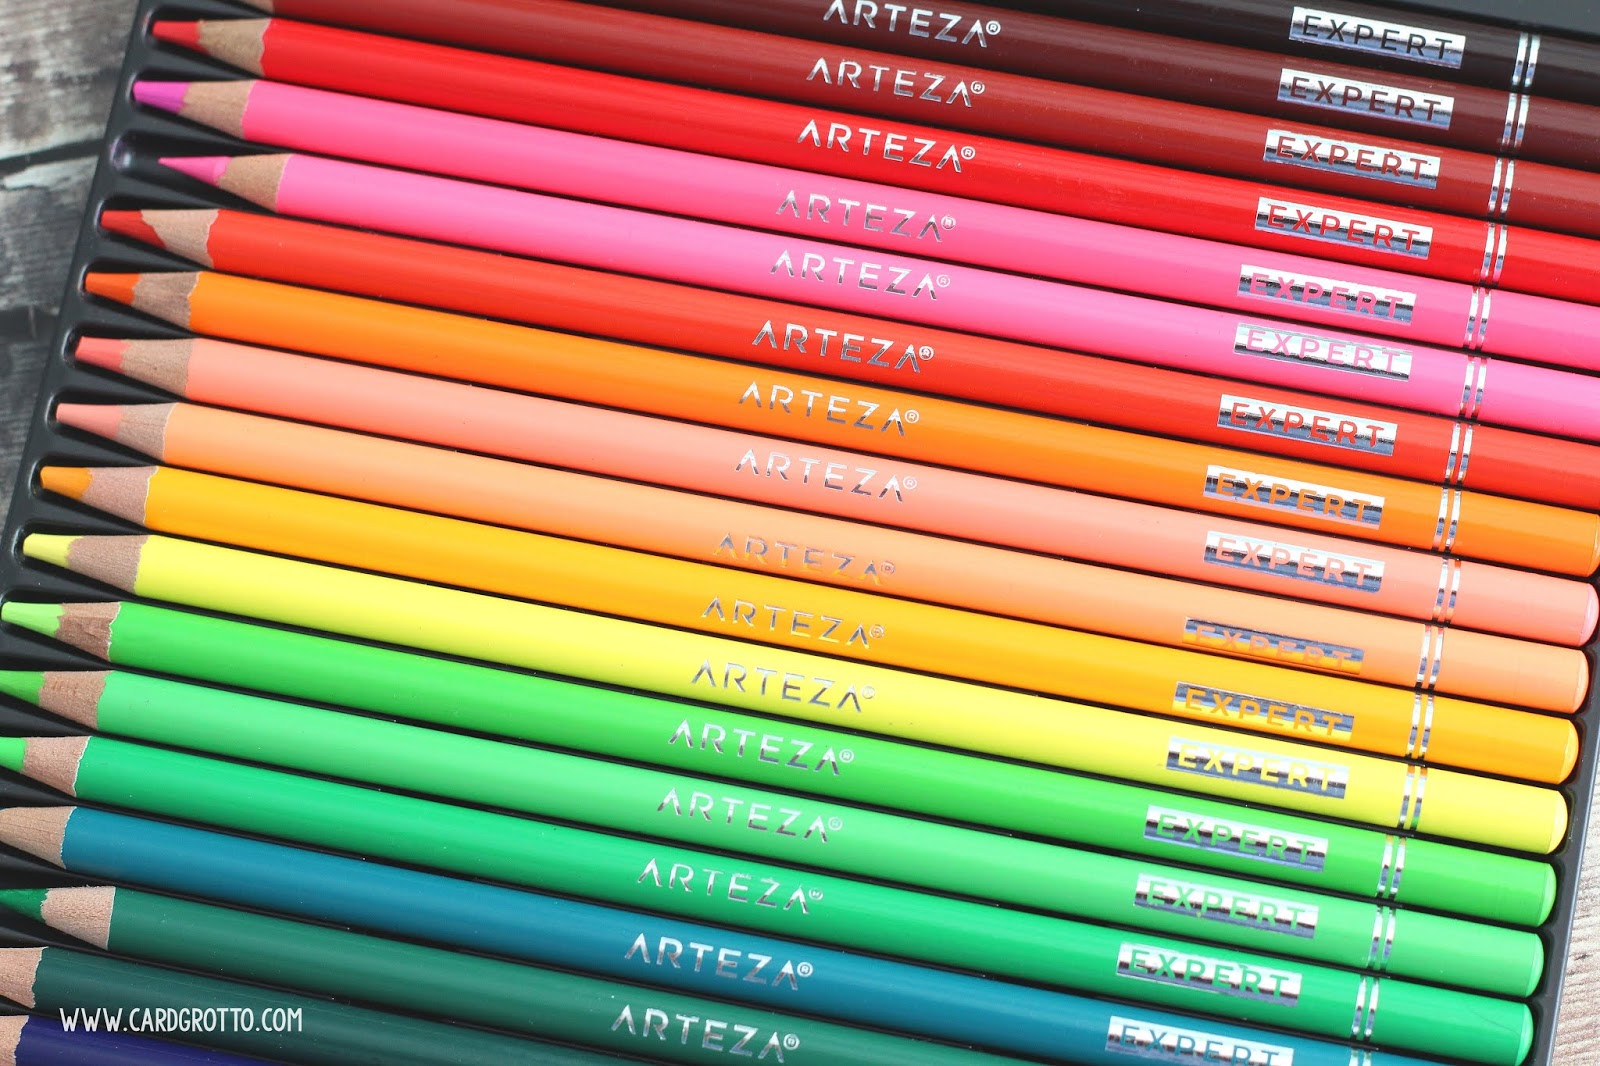 The Card Grotto Video Arteza Coloured Pencils Colouring Review Arteza professional color pencils can be purchased only in two sets one is 48 pencils set and another is 72 pencils set. arteza coloured pencils colouring